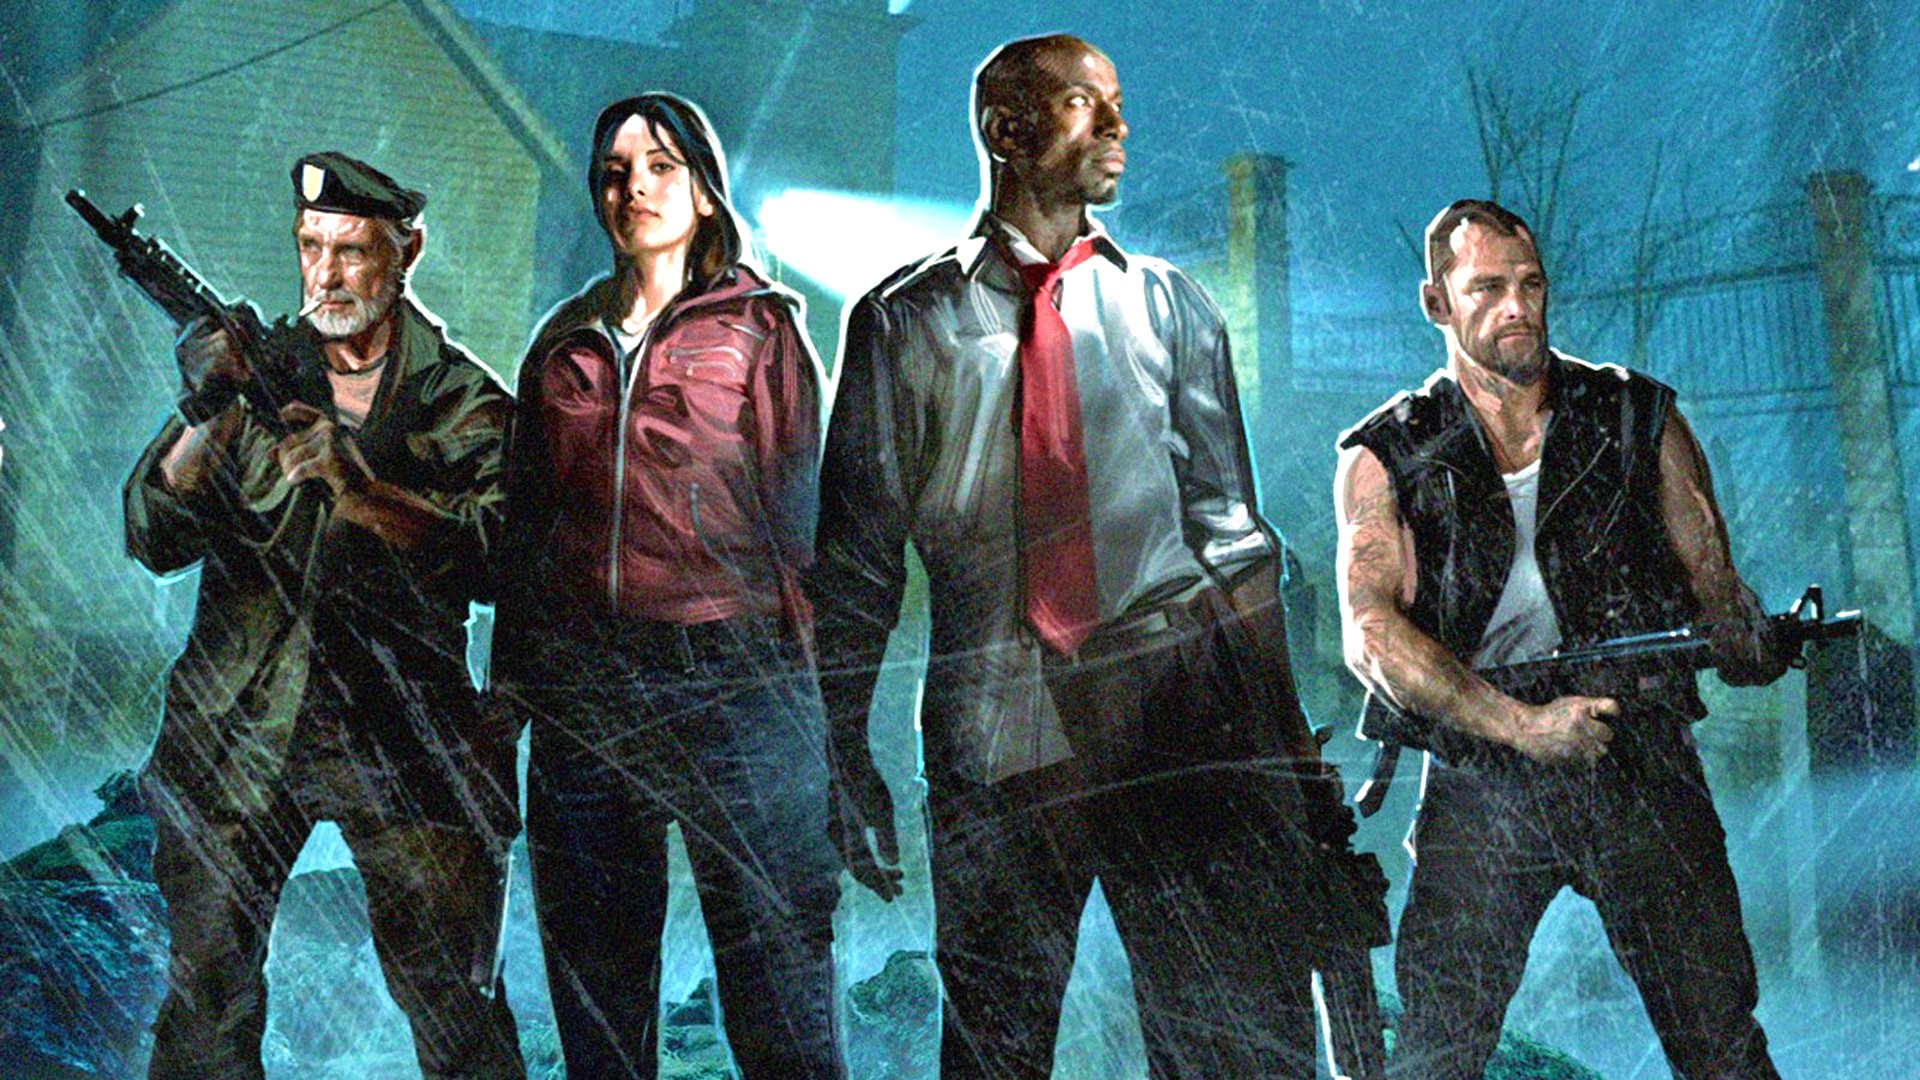 The best games like Left 4 Dead and Payday 2 on PC